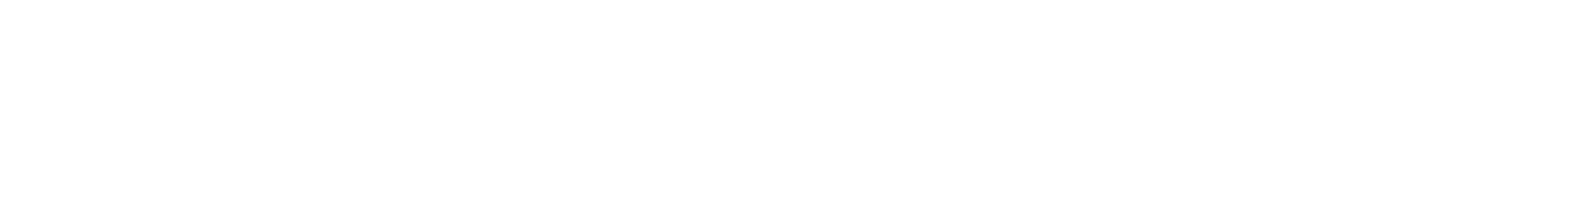 Global Content Marketing Manager at Gallagher